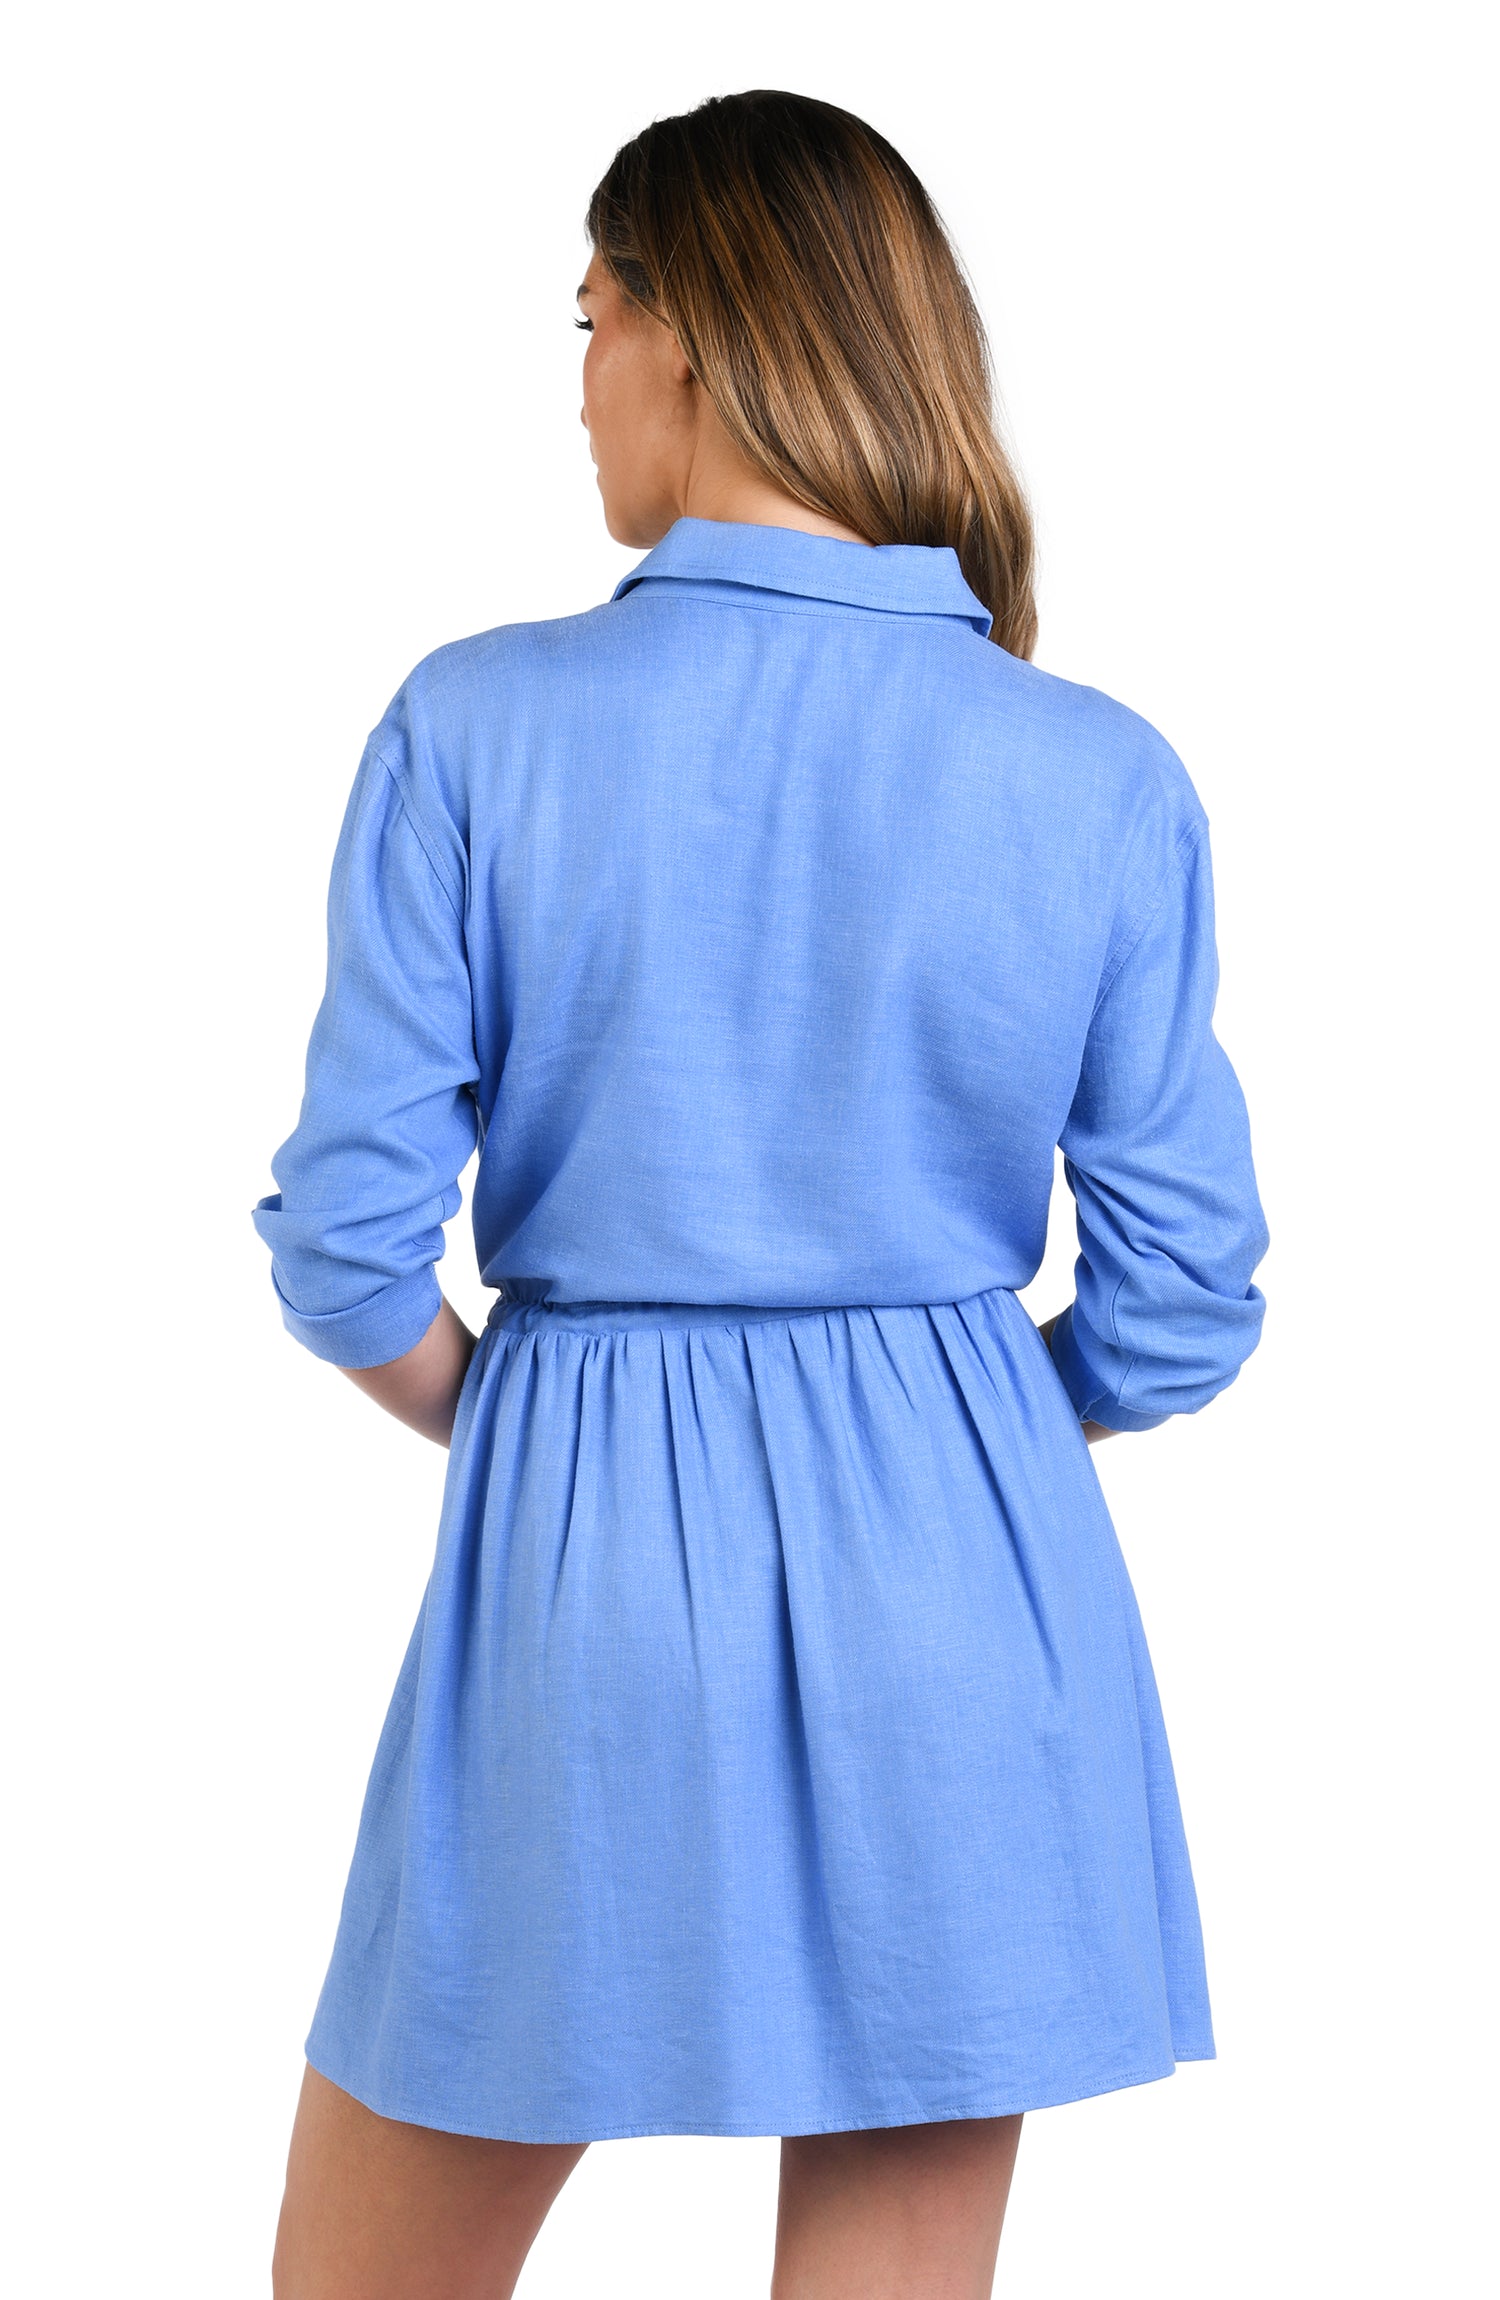 Model is wearing a solid chambray (light blue) colored tunnel shirt dress cover up.